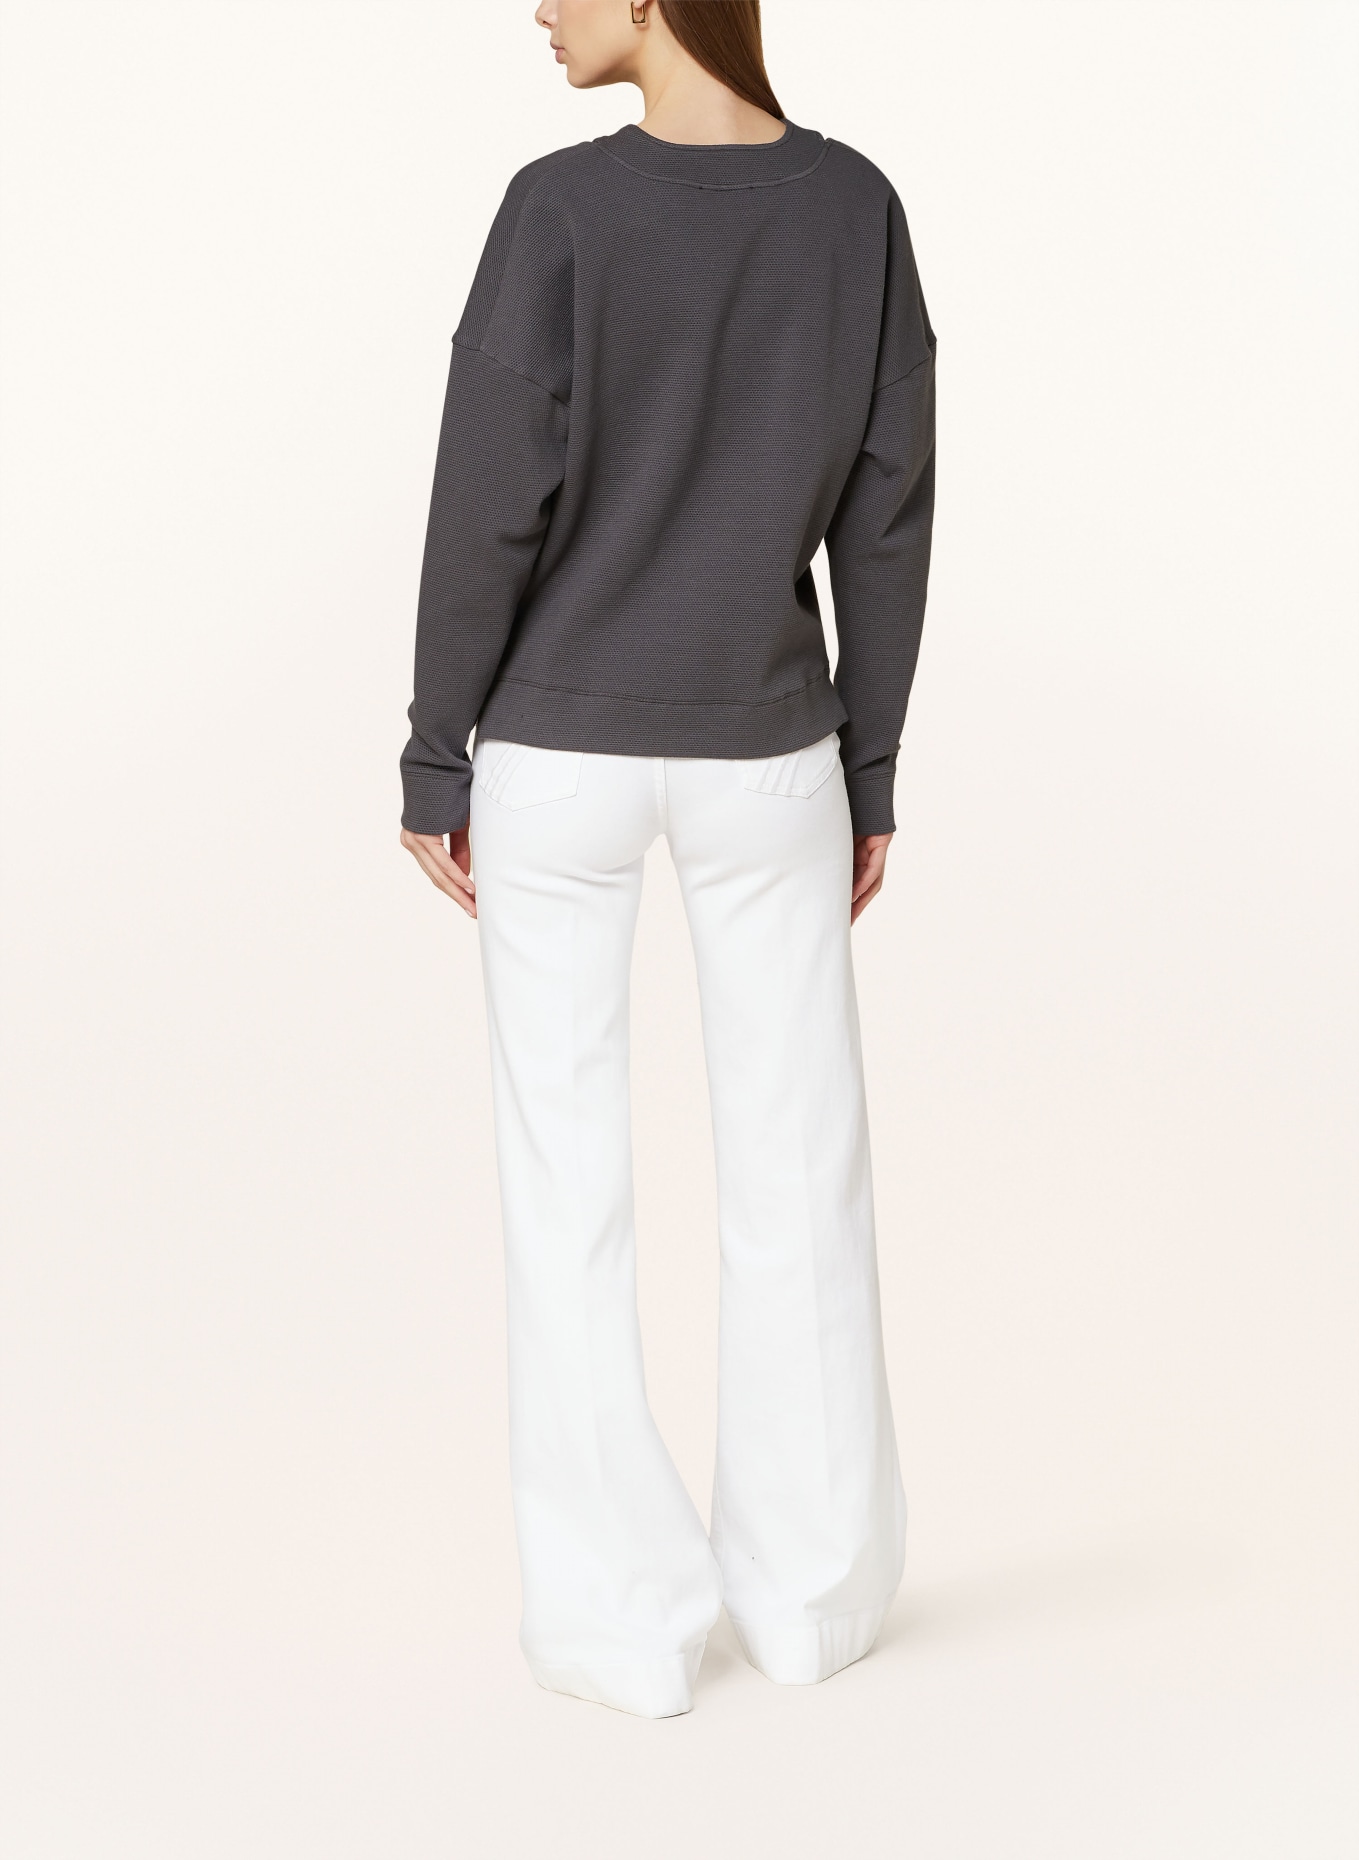 VANILIA Sweater with cut-out, Color: DARK GRAY (Image 3)